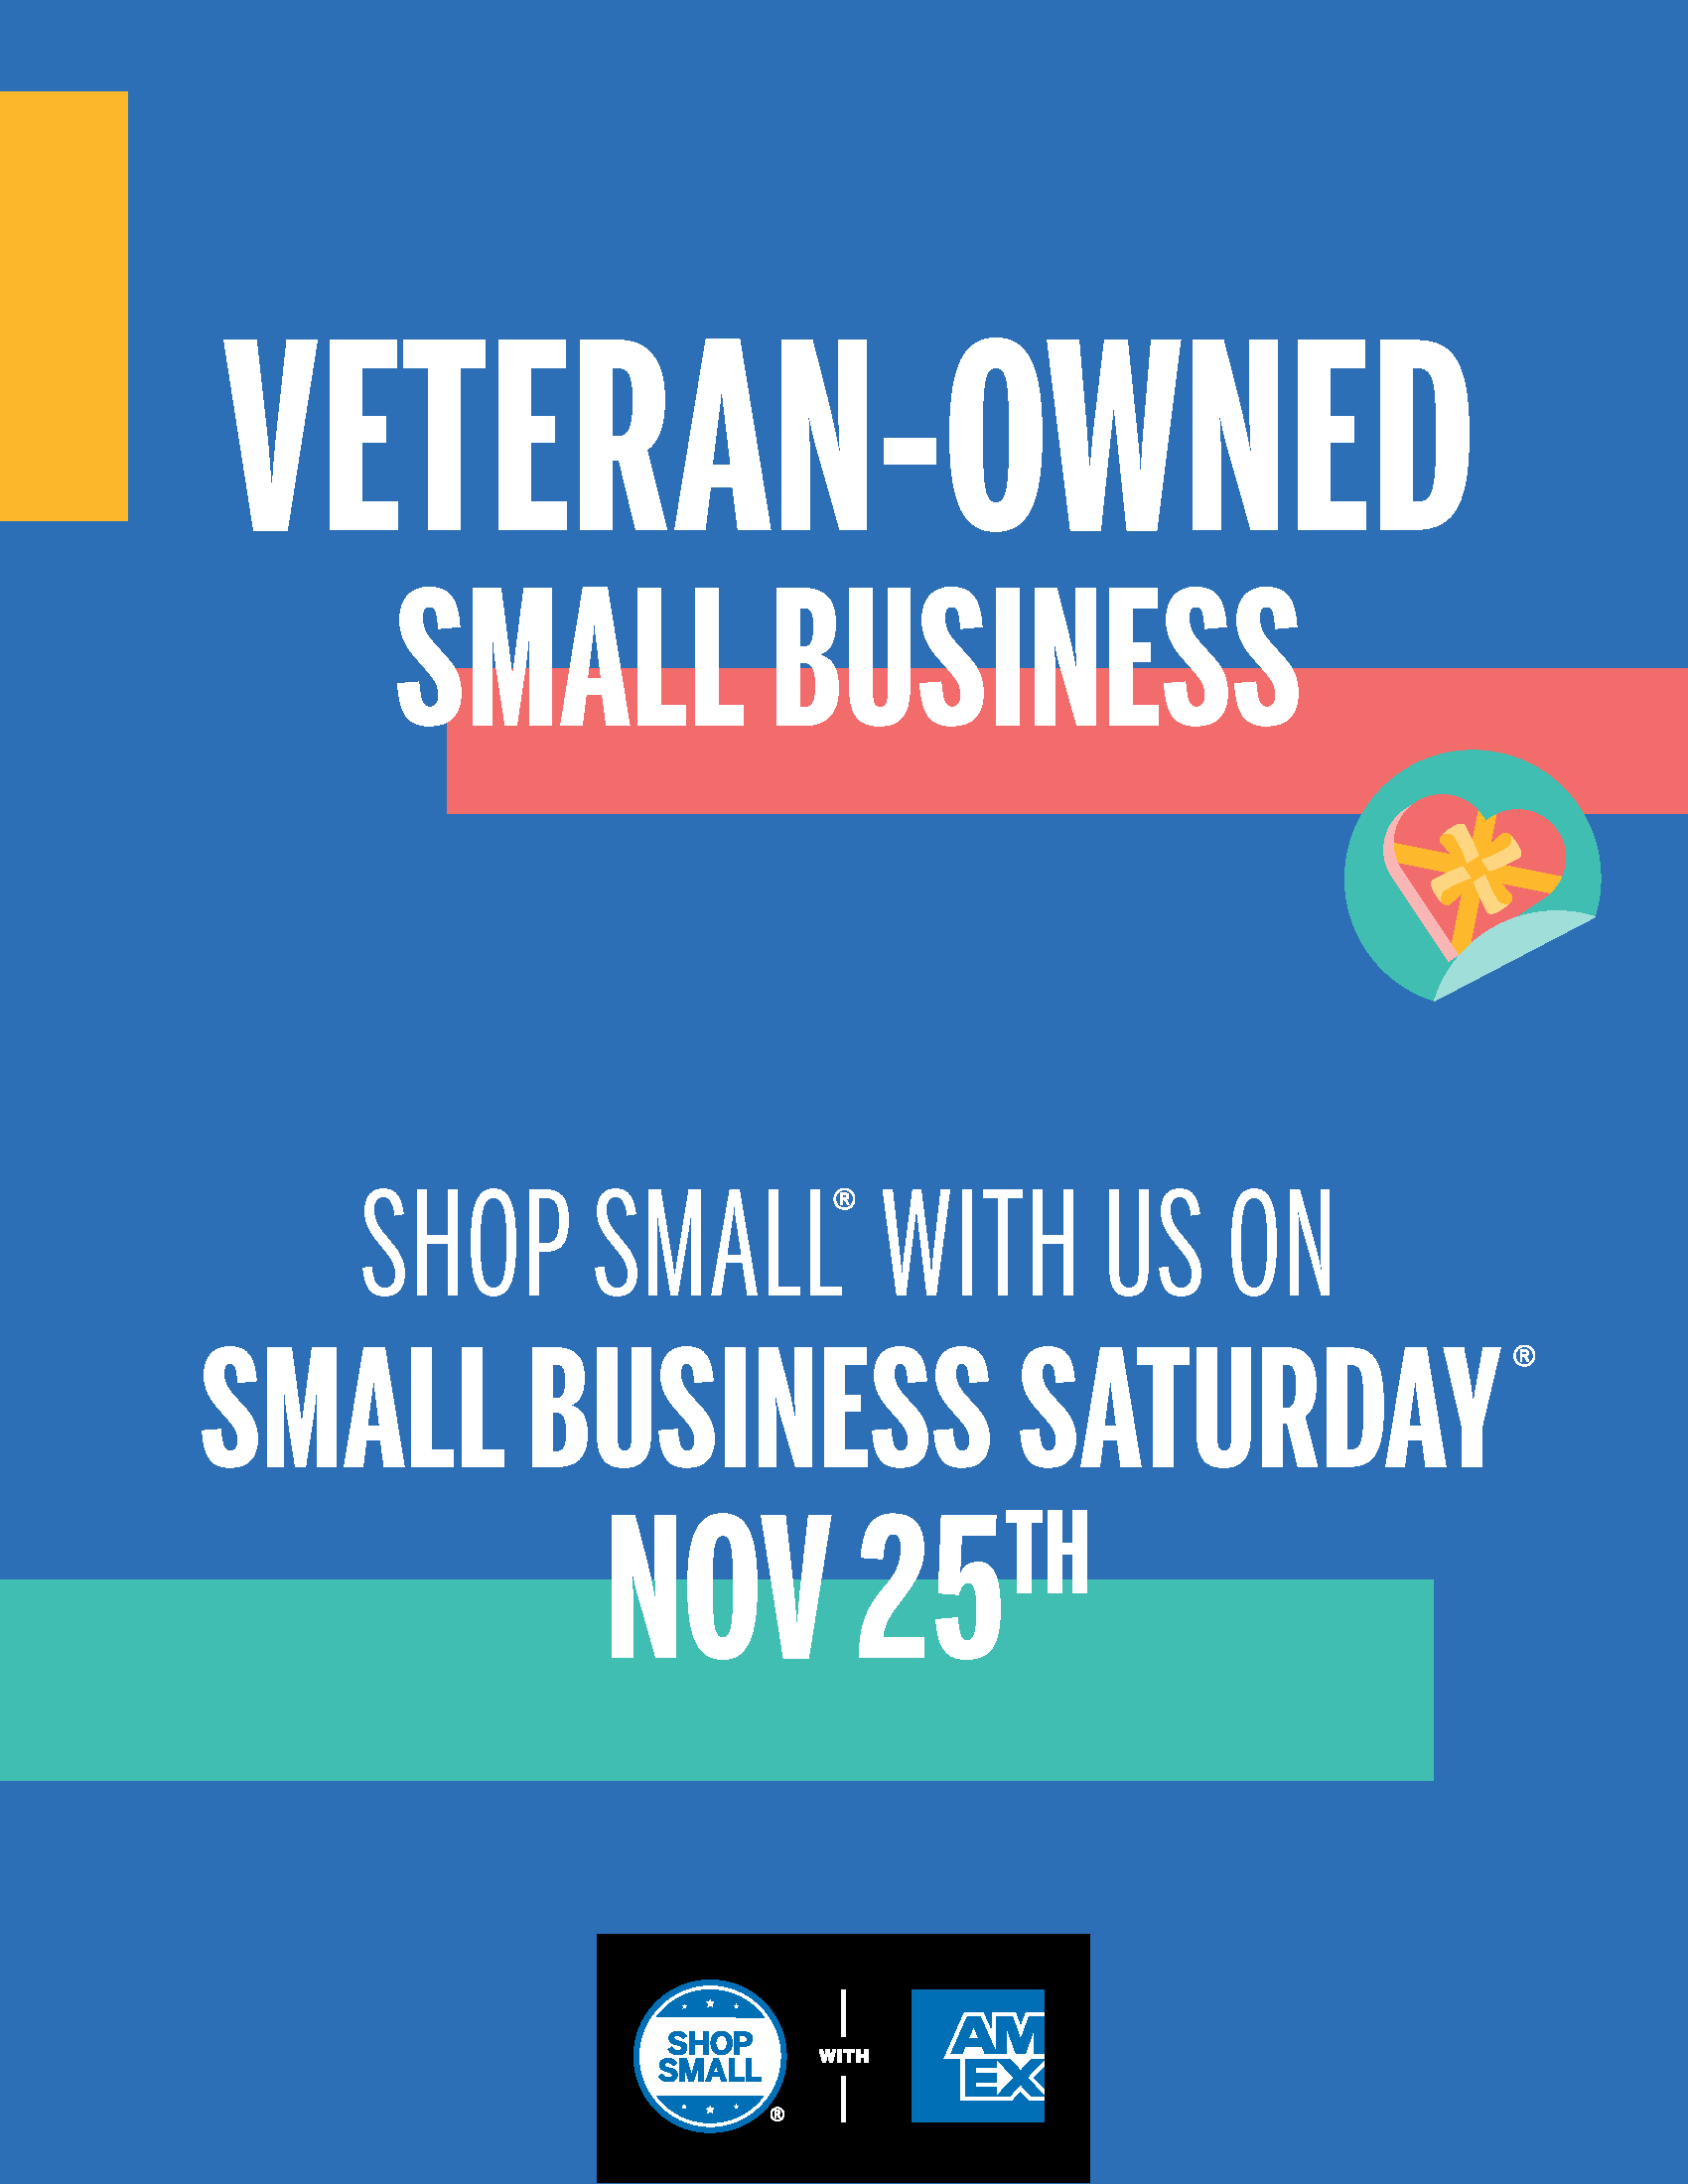 Thumbnail image of Poster PDF that reads Veteran-Owned Small Business; Shop Small with us on Small Business Saturday Nov 25th and includes the Shop Small with Amex logo